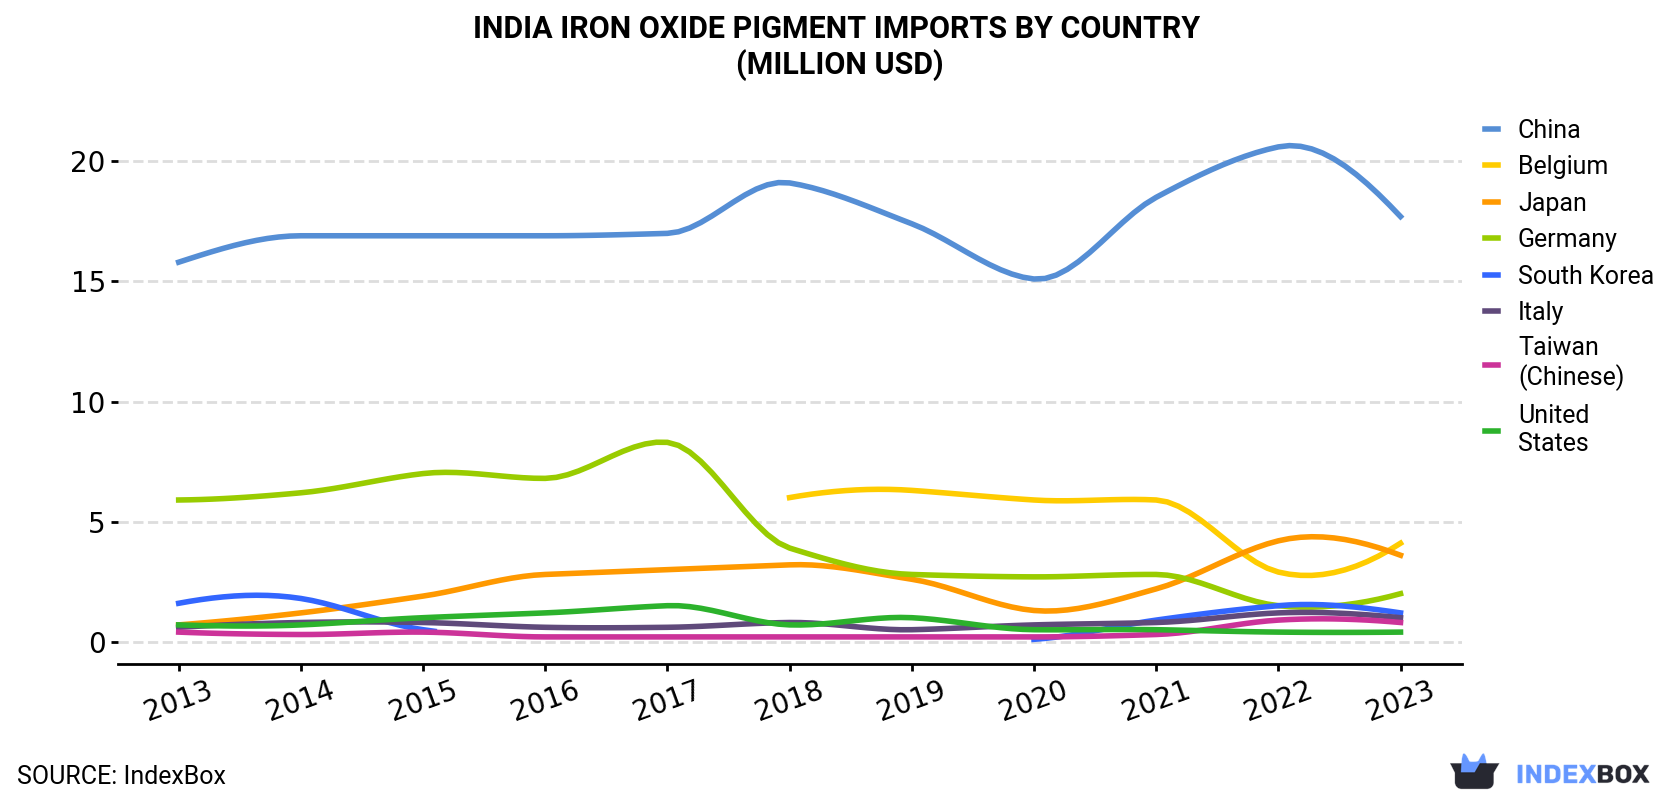 India Iron Oxide Pigment Imports By Country (Million USD)